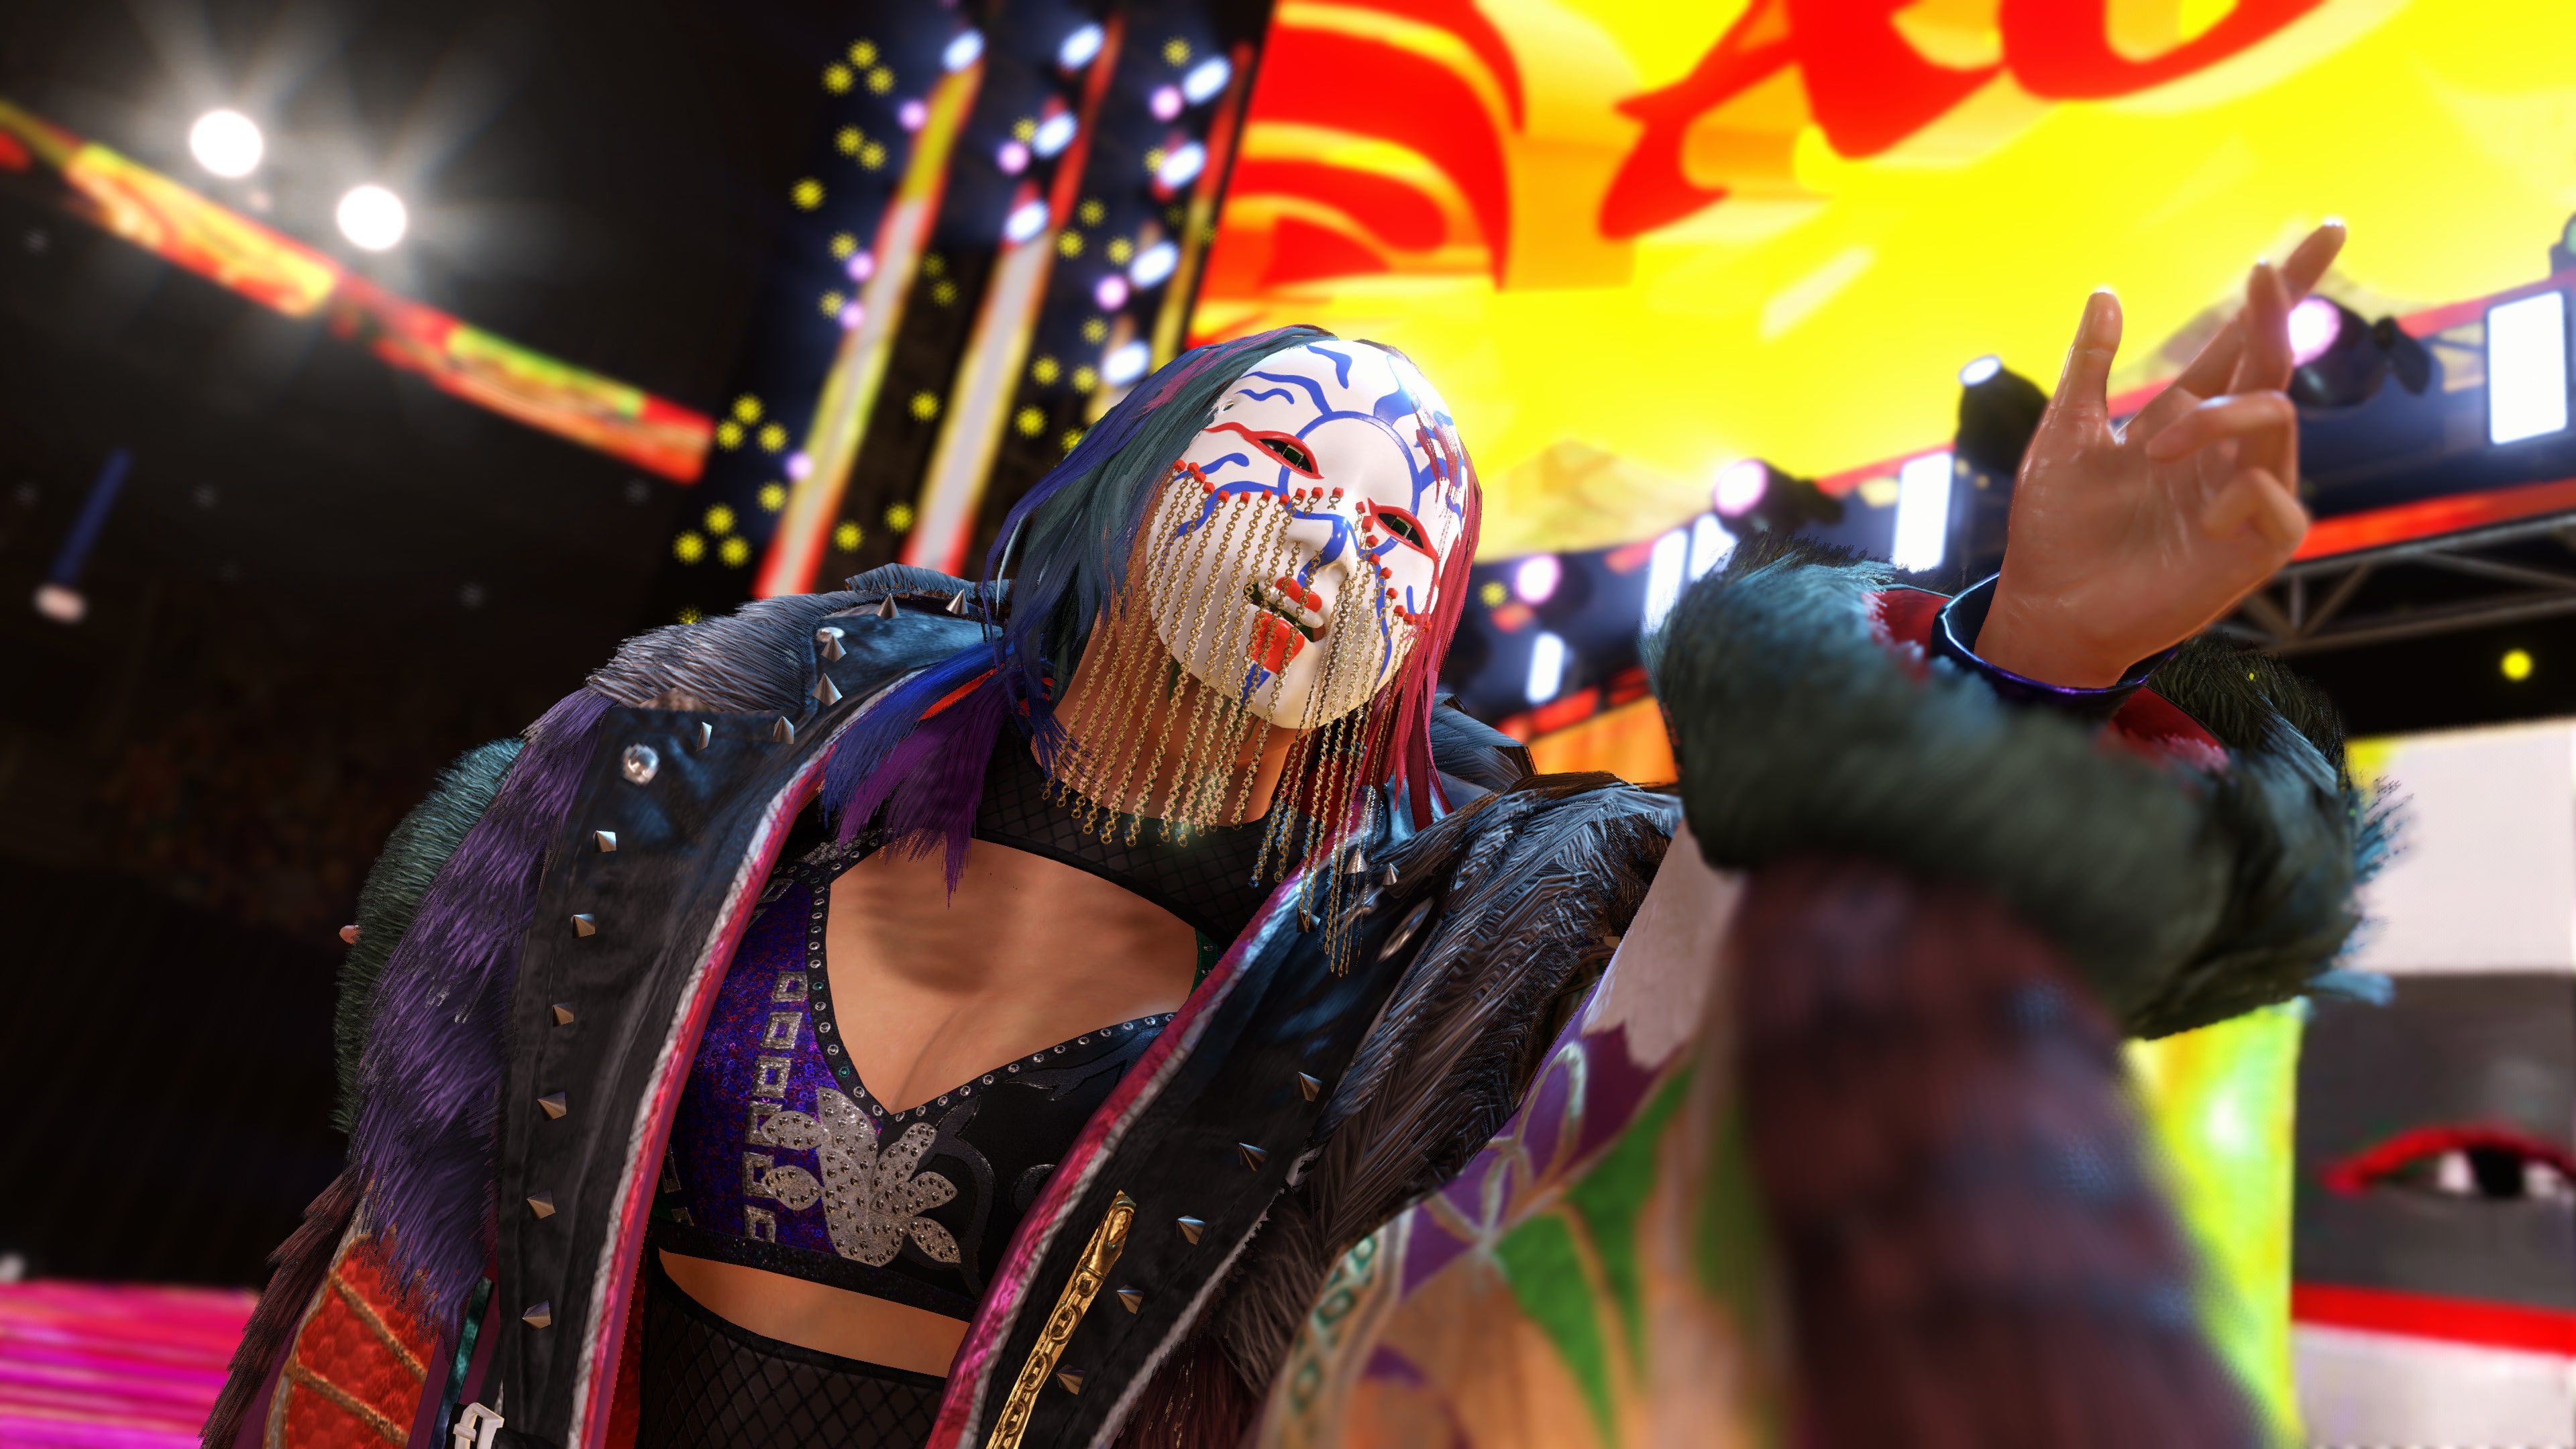 WWE 2K22 Nwo 4-Life Edition on PS4 PS5 — price history